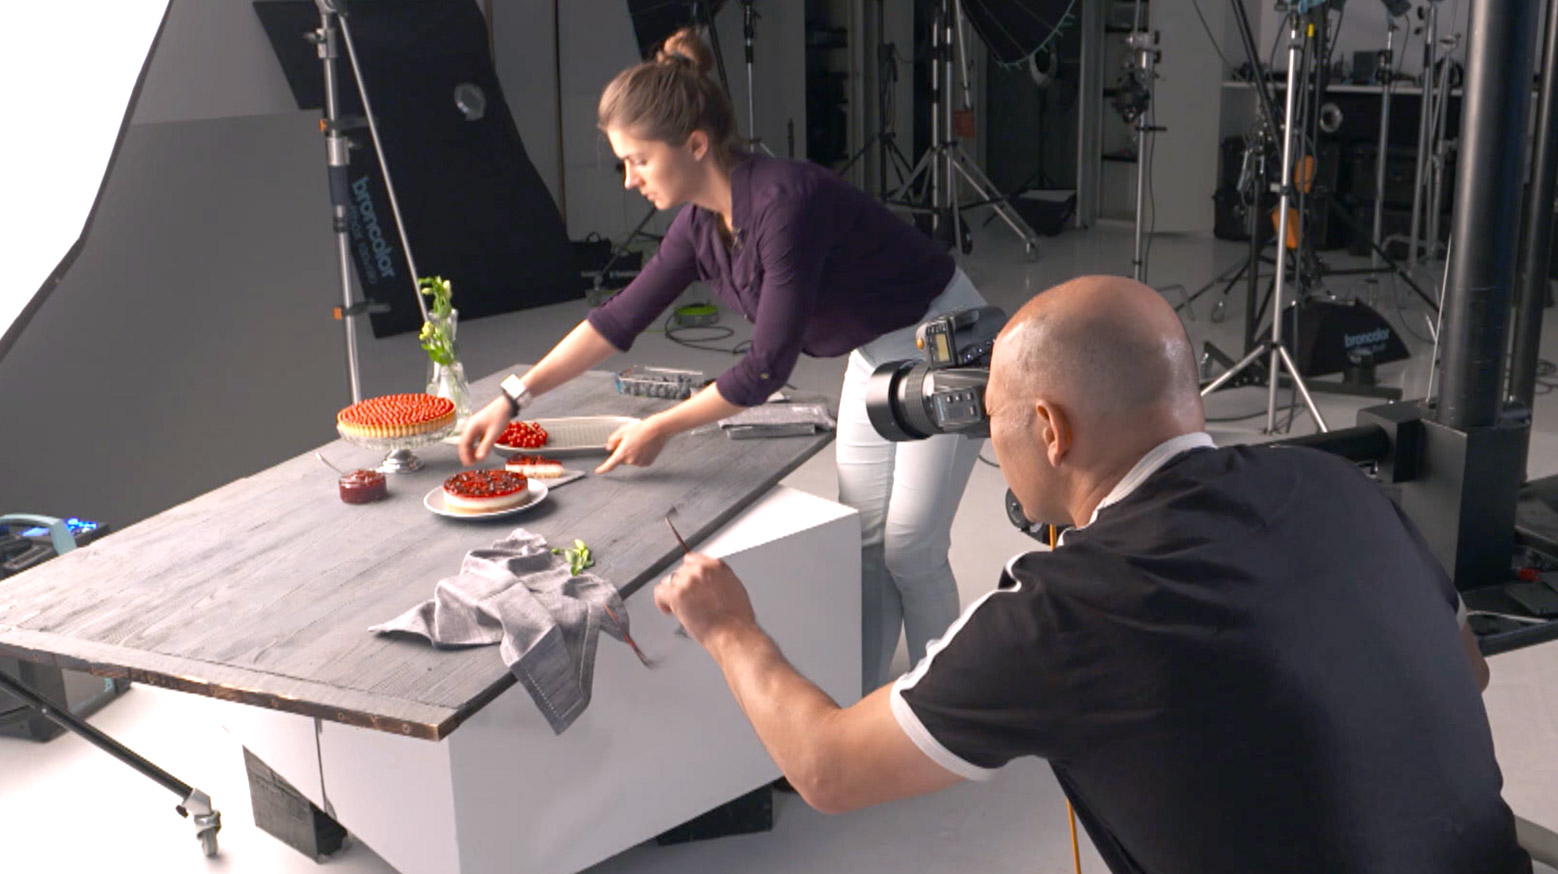 Assistant styling during a food photography shoot